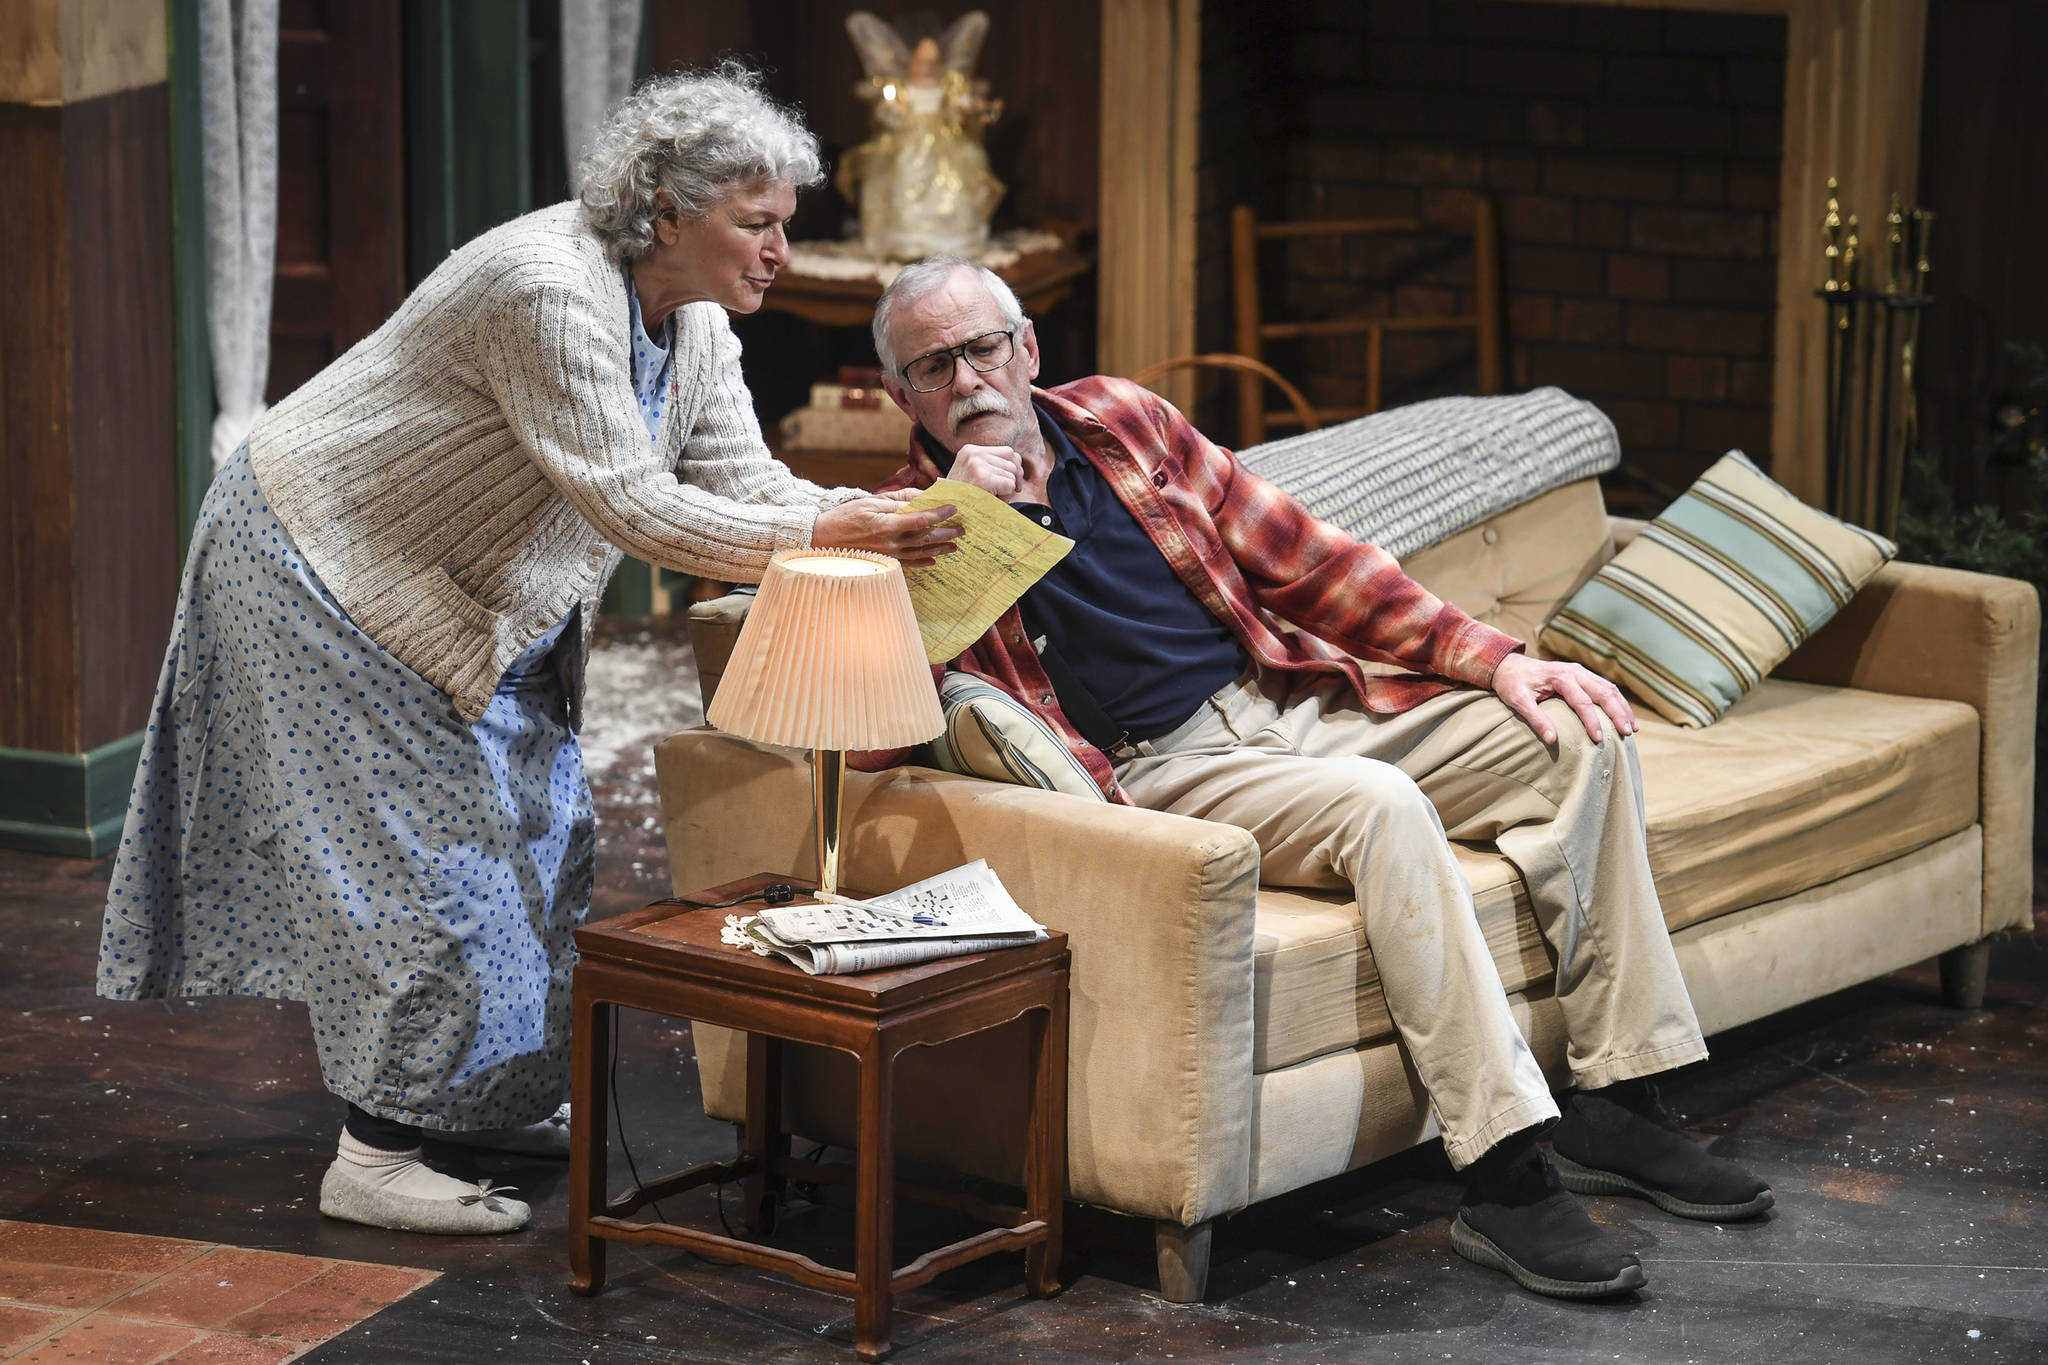 Clifford, played by Charlie Cardwell, and Minnie, played by Angelina Fiordellisi, rehearse in Perseverance Theatre’s production of “With” by playwright Carter Lewis on Tuesday, Nov. 19, 2019. “With” opens Friday Nov. 22 and runs through Dec. 15. (Michael Penn | Juneau Empire)